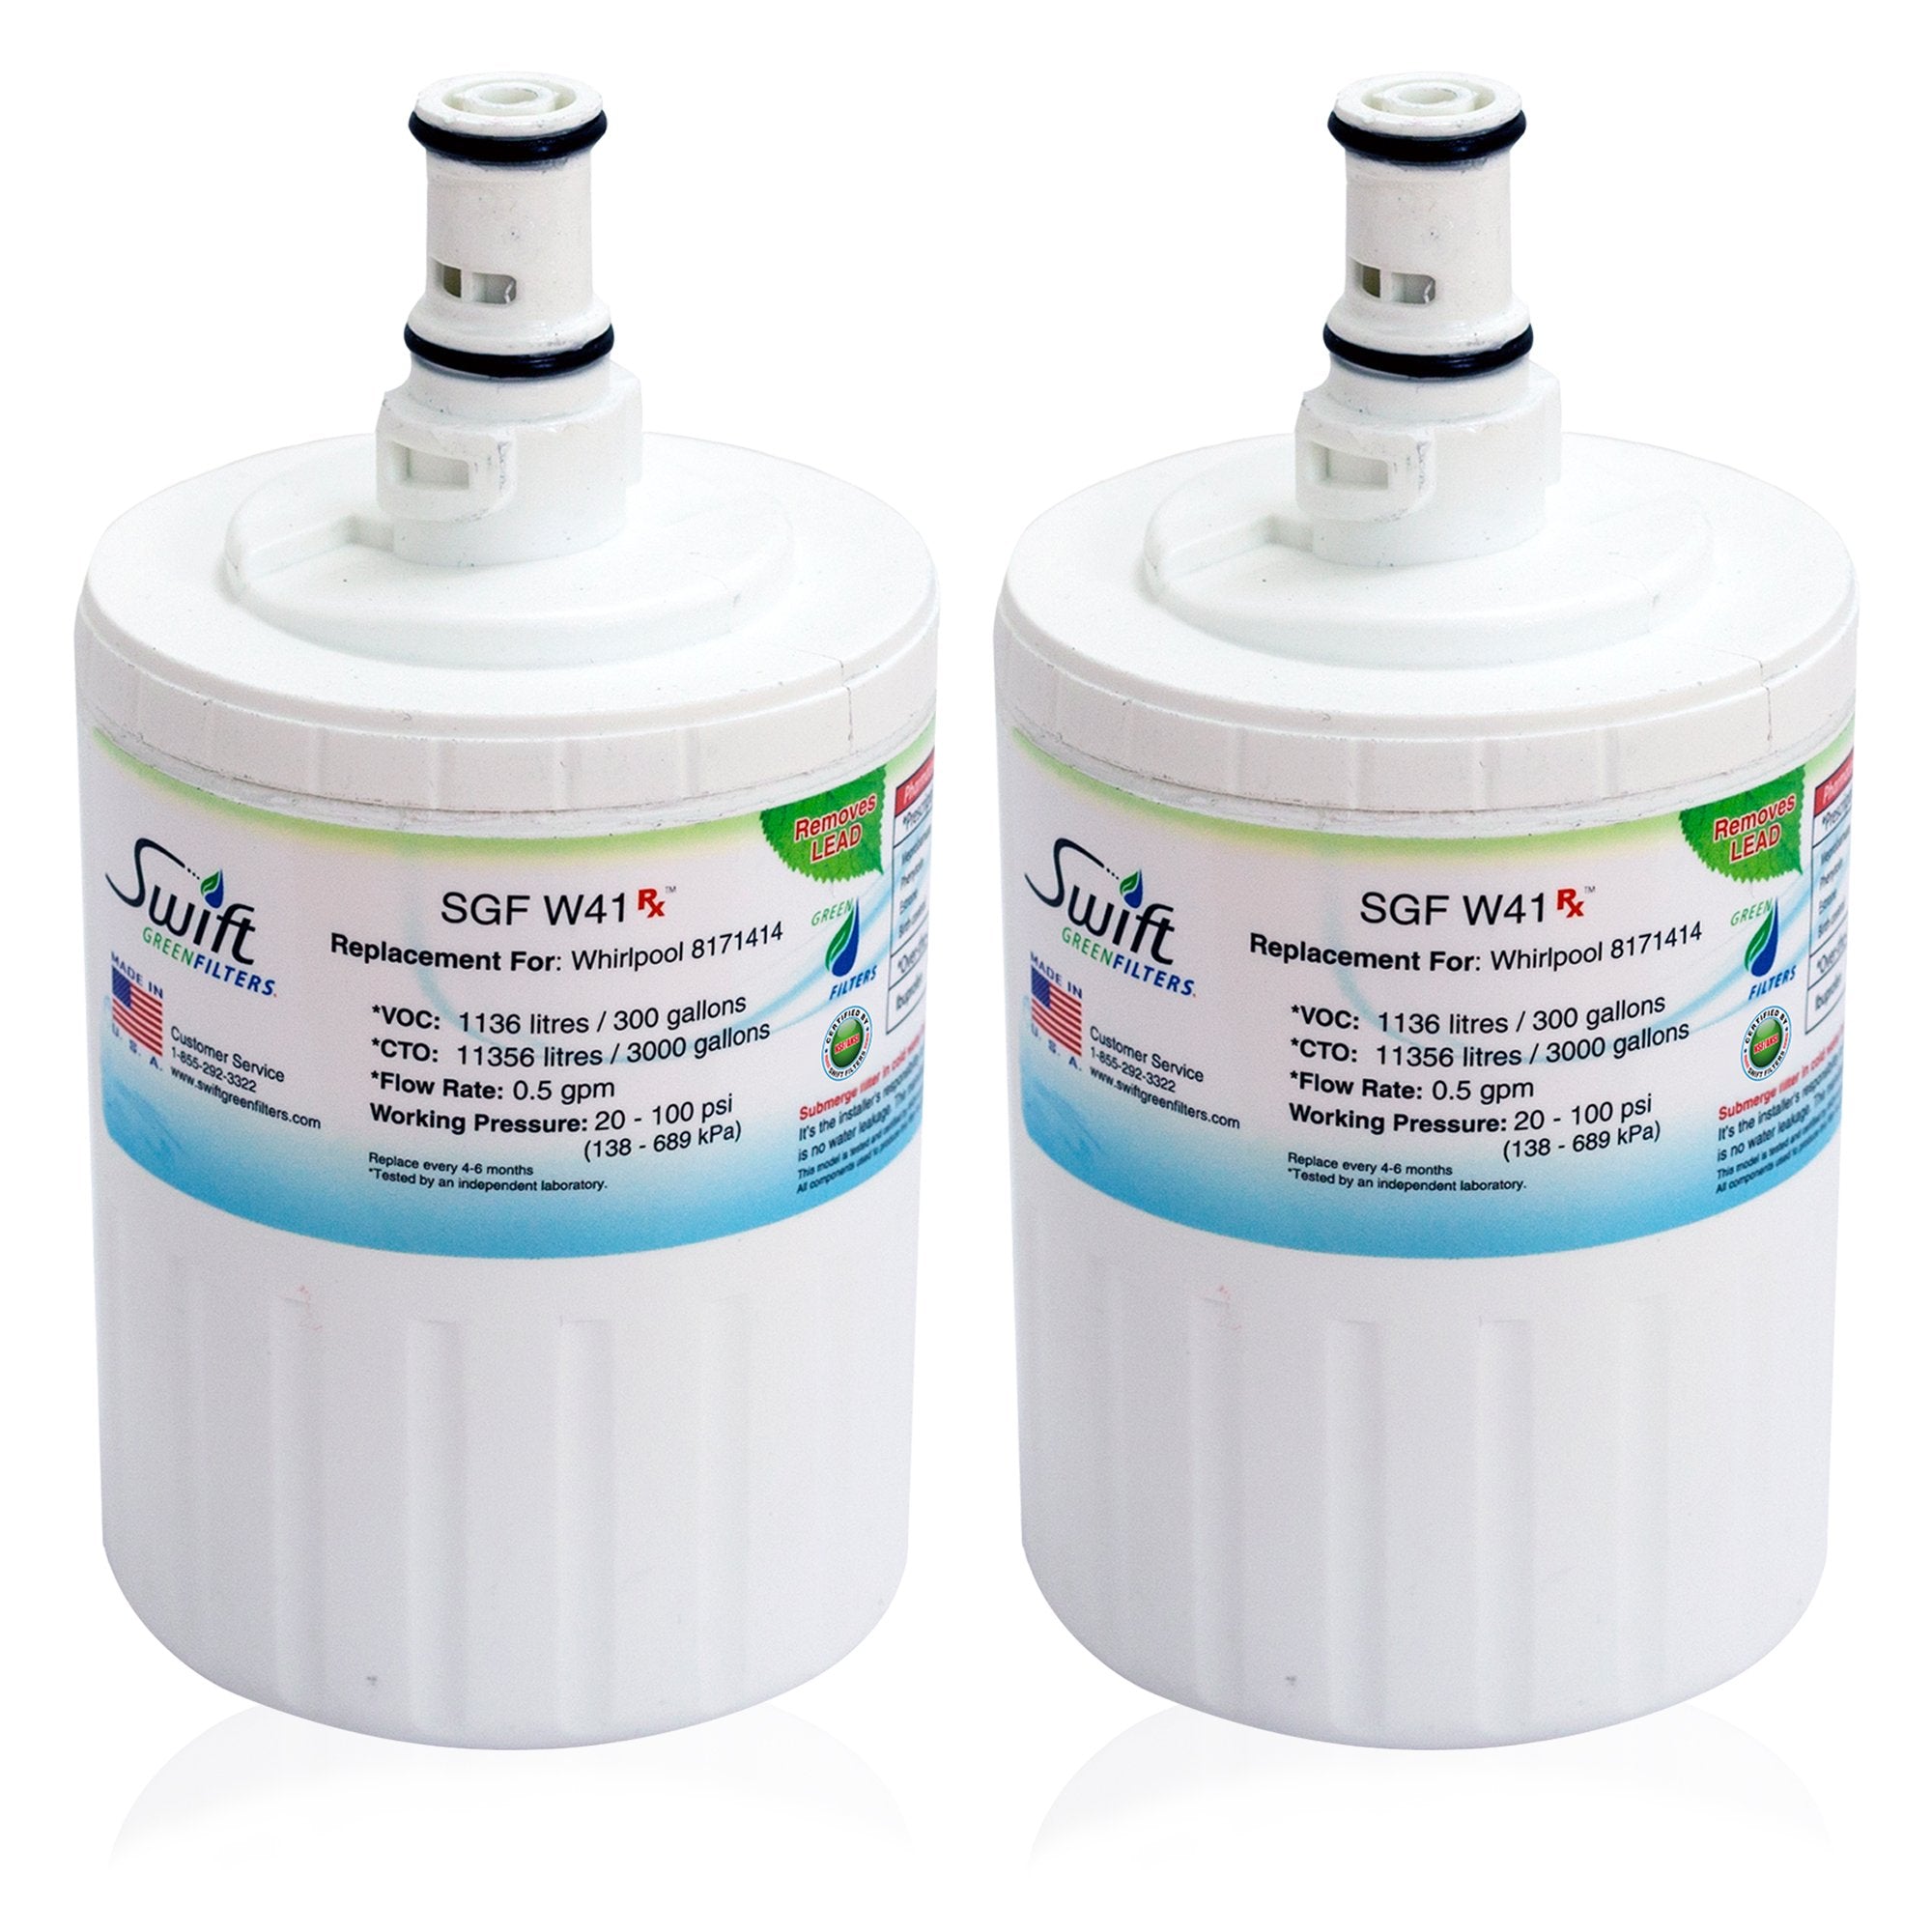 EveryDrop EDR8D1 (Filter 8) & Whirlpool 8171413 Compatible Pharmaceutical Refrigerator Water Filter 2 pack